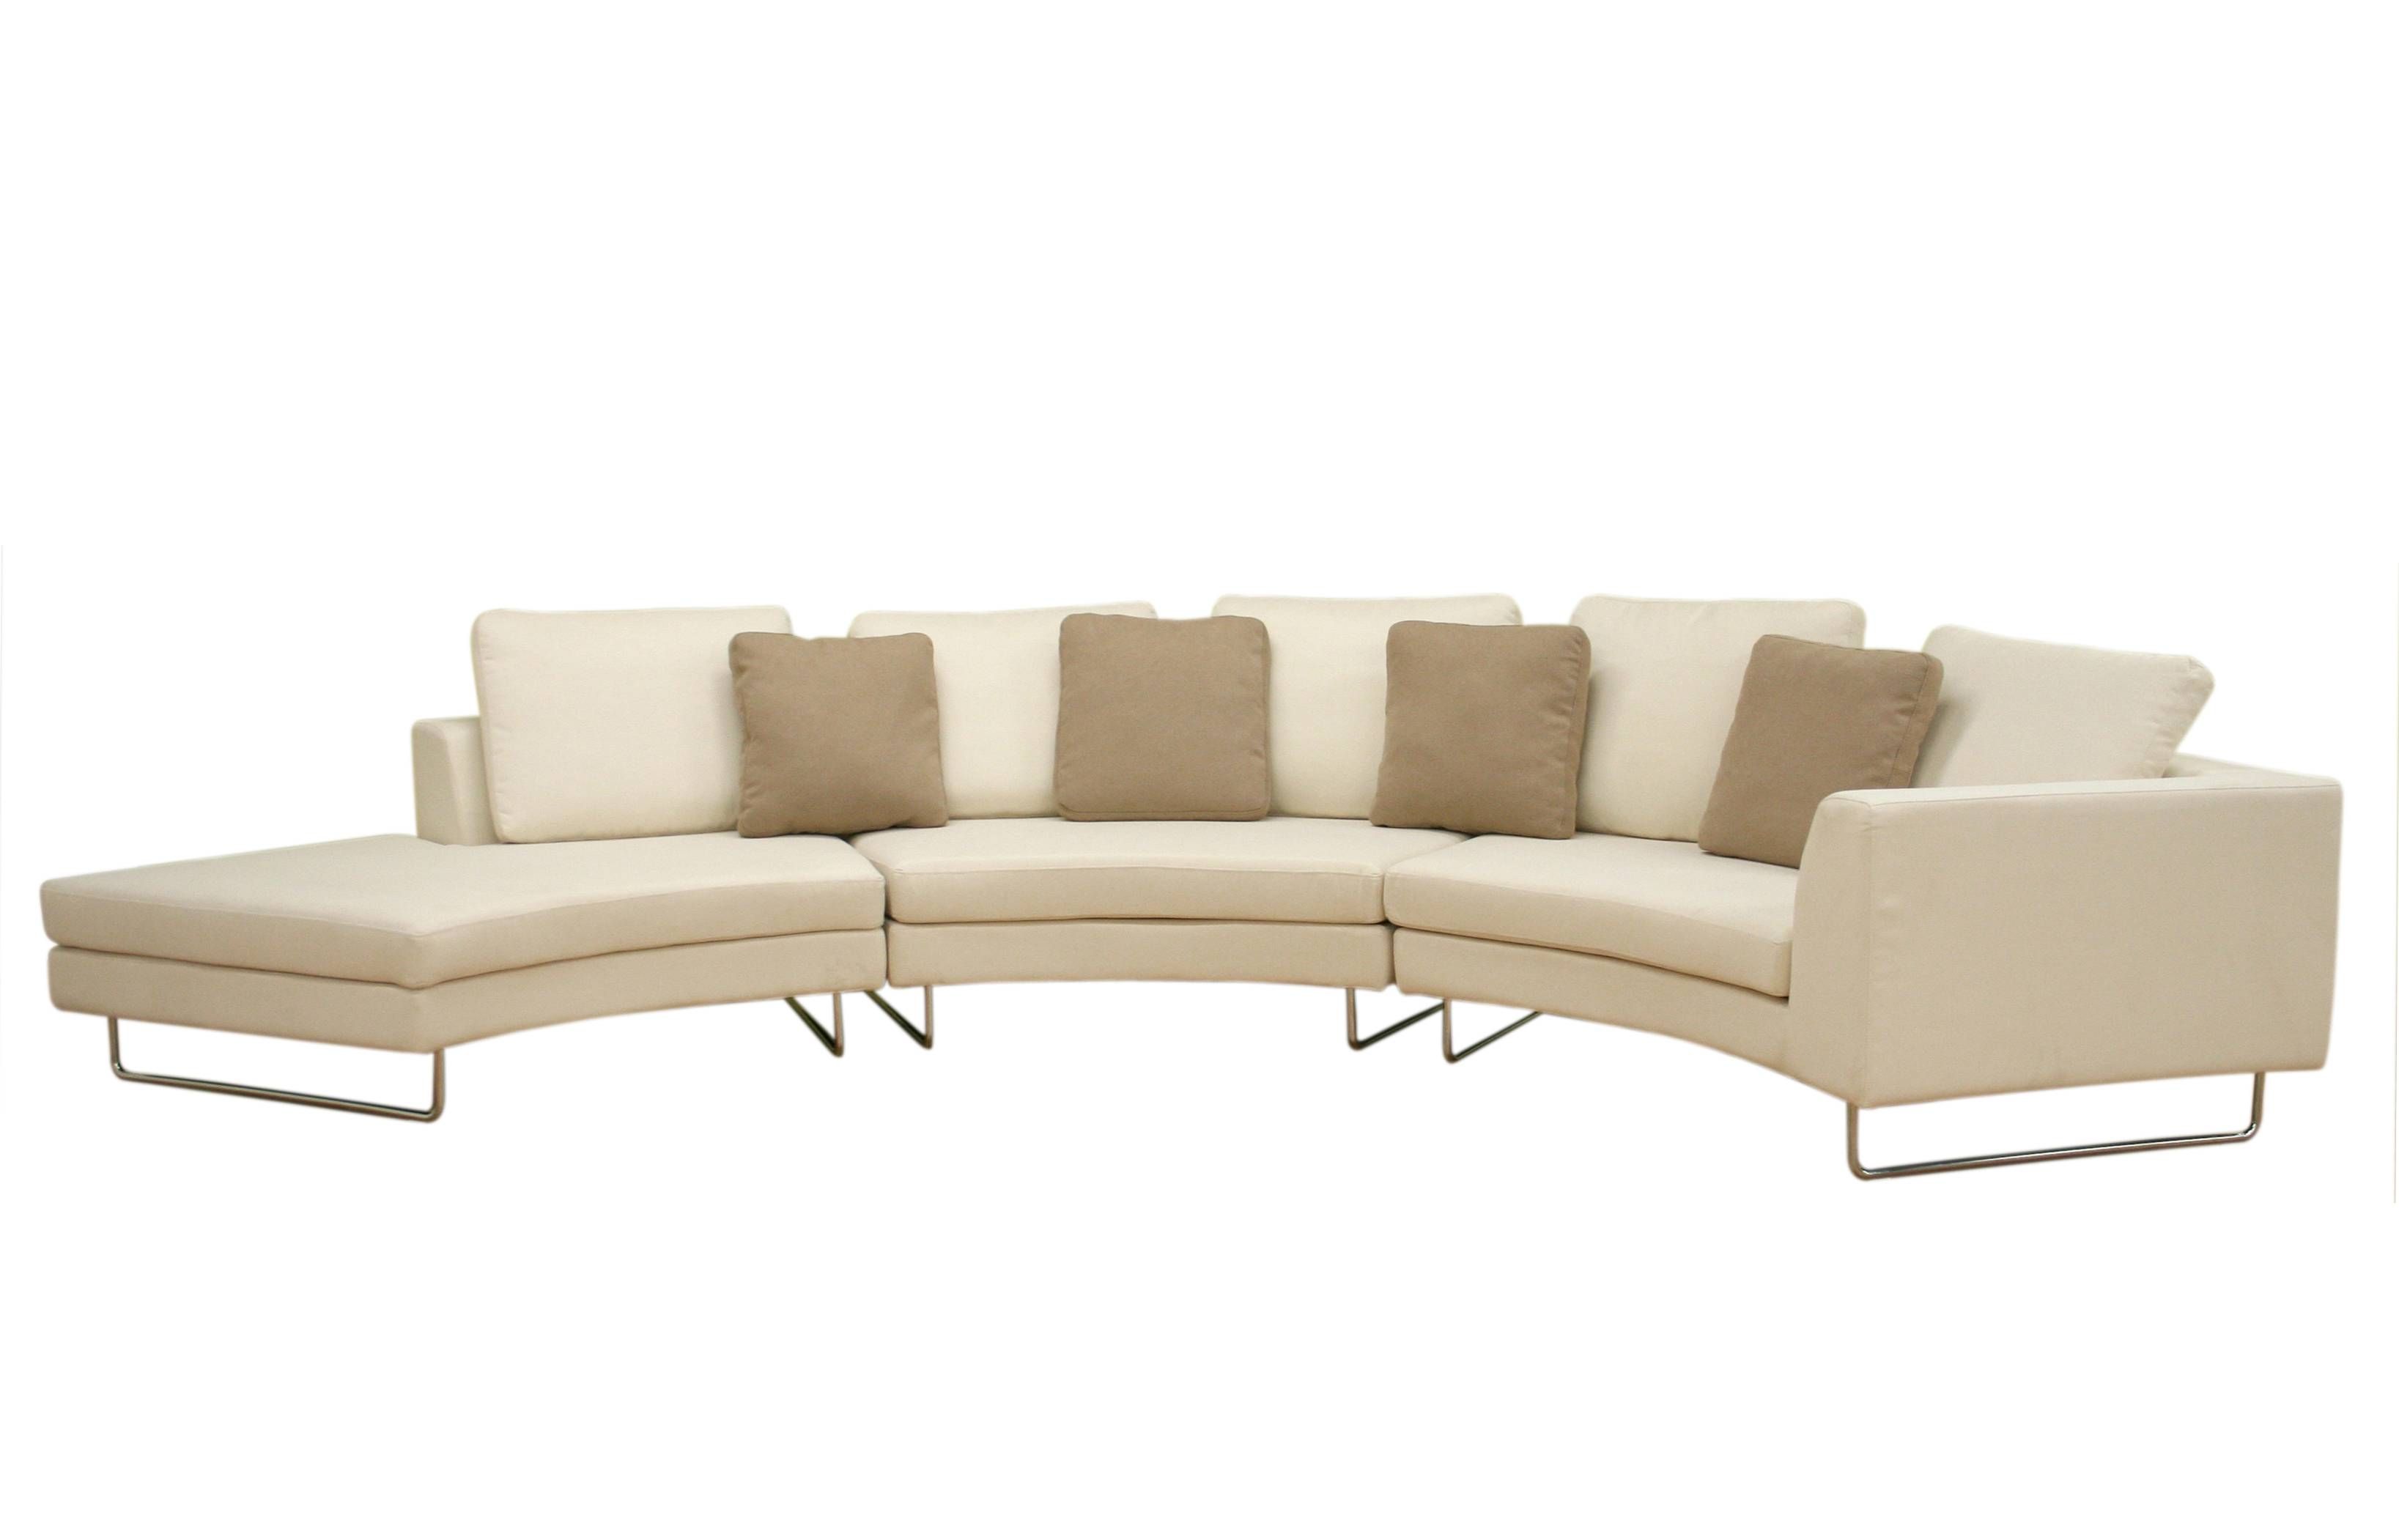 Sofas Center : Inexpensive Sectional Sofas For Small Spaces Best For Inexpensive Sectional Sofas For Small Spaces (View 23 of 30)